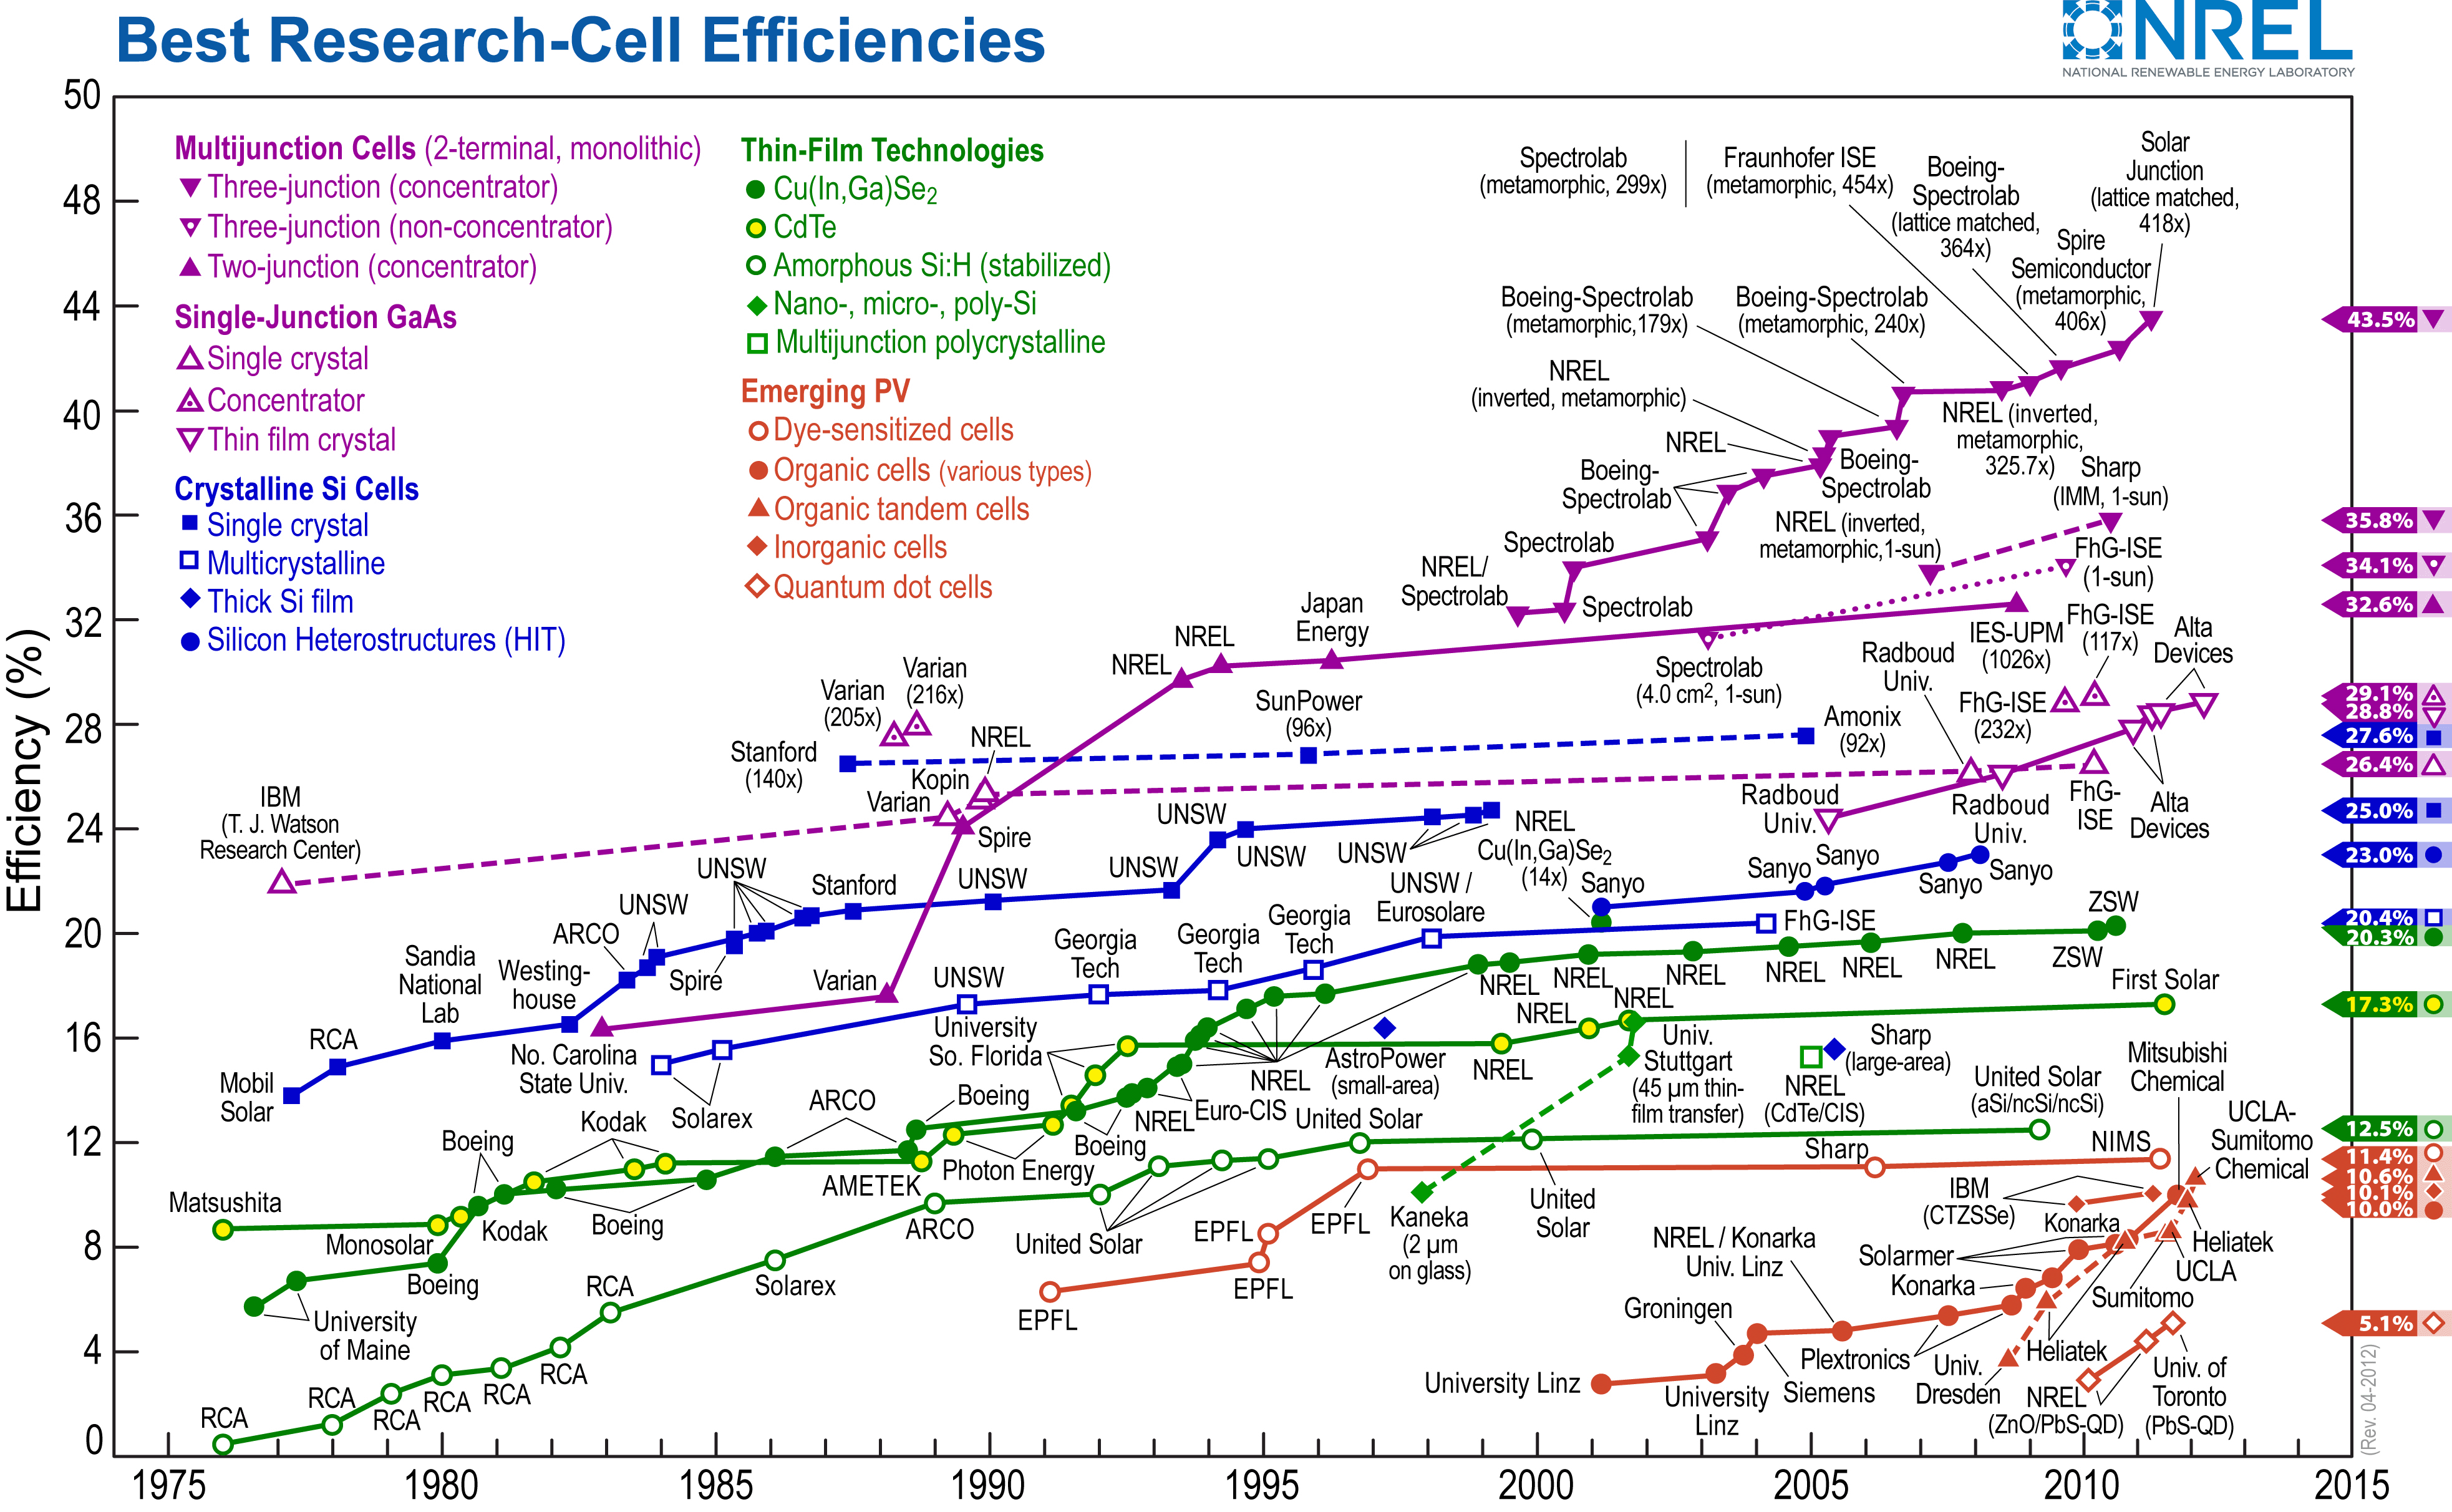 Best research-cell efficiencies for solar cells